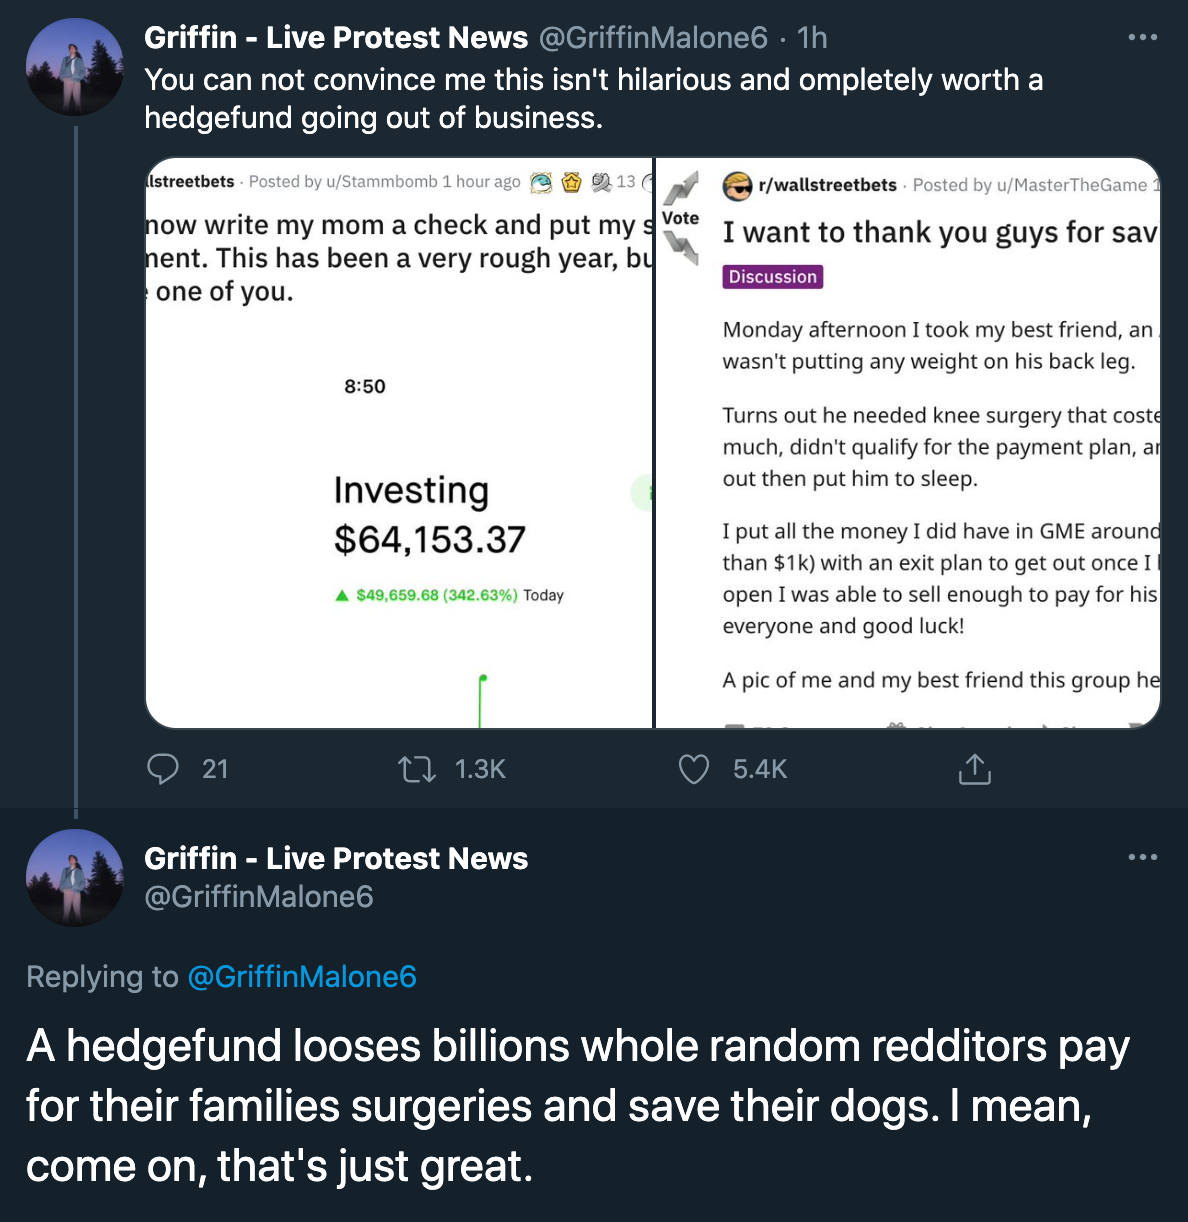 funny gamestop stock jokes - A hedgefund looses billions whole random redditors pay for their families surgeries and save their dogs. I mean, come on, that's just great.